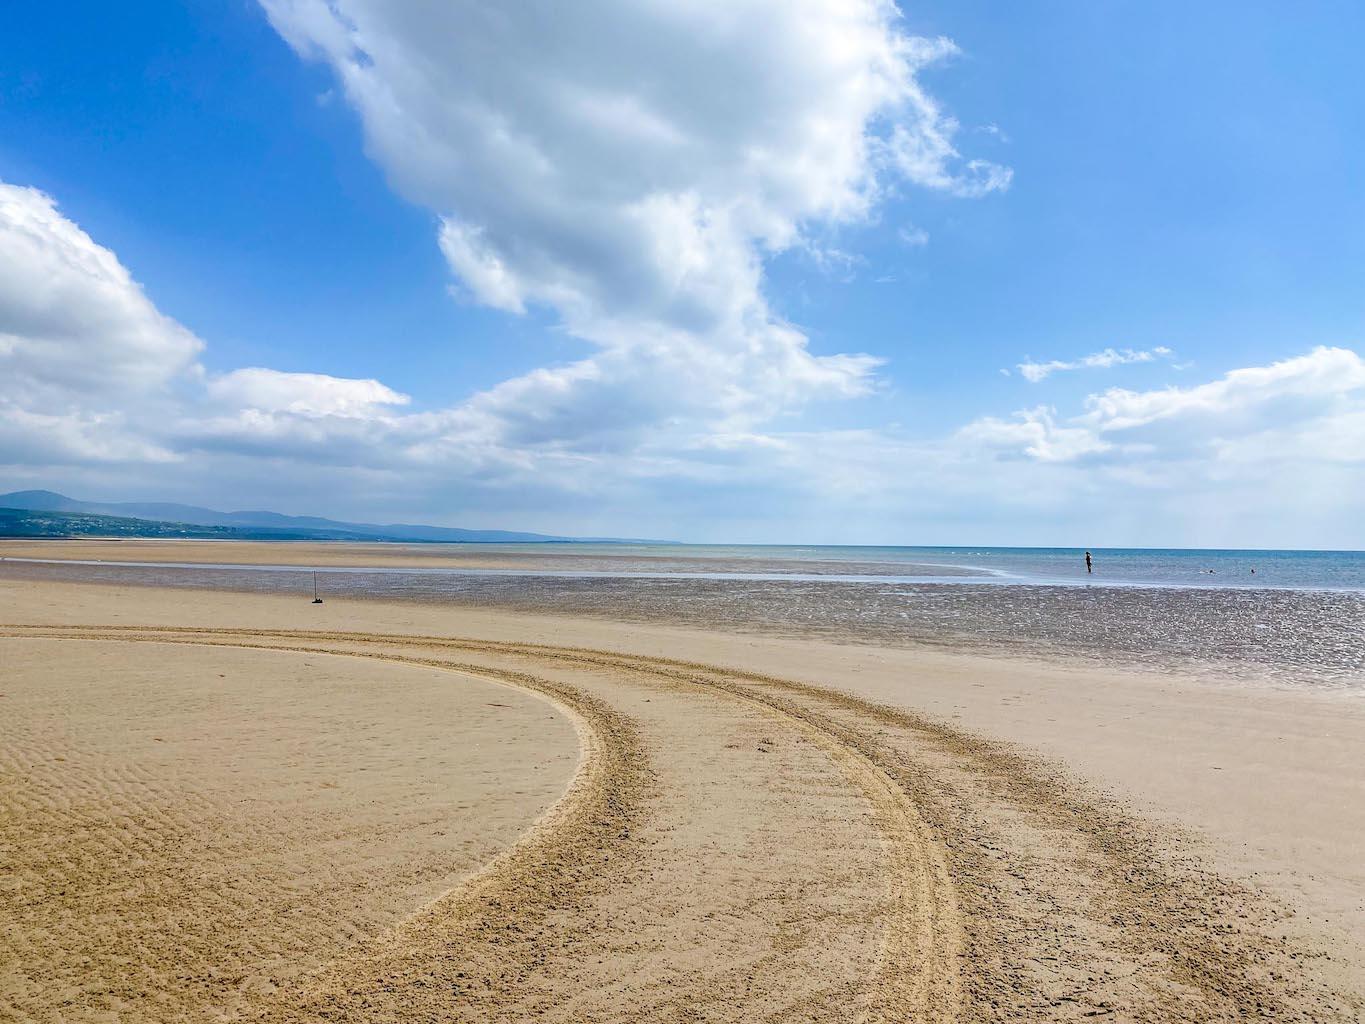 Places to go in wales, Black rock sands beach is tyre marks on sand